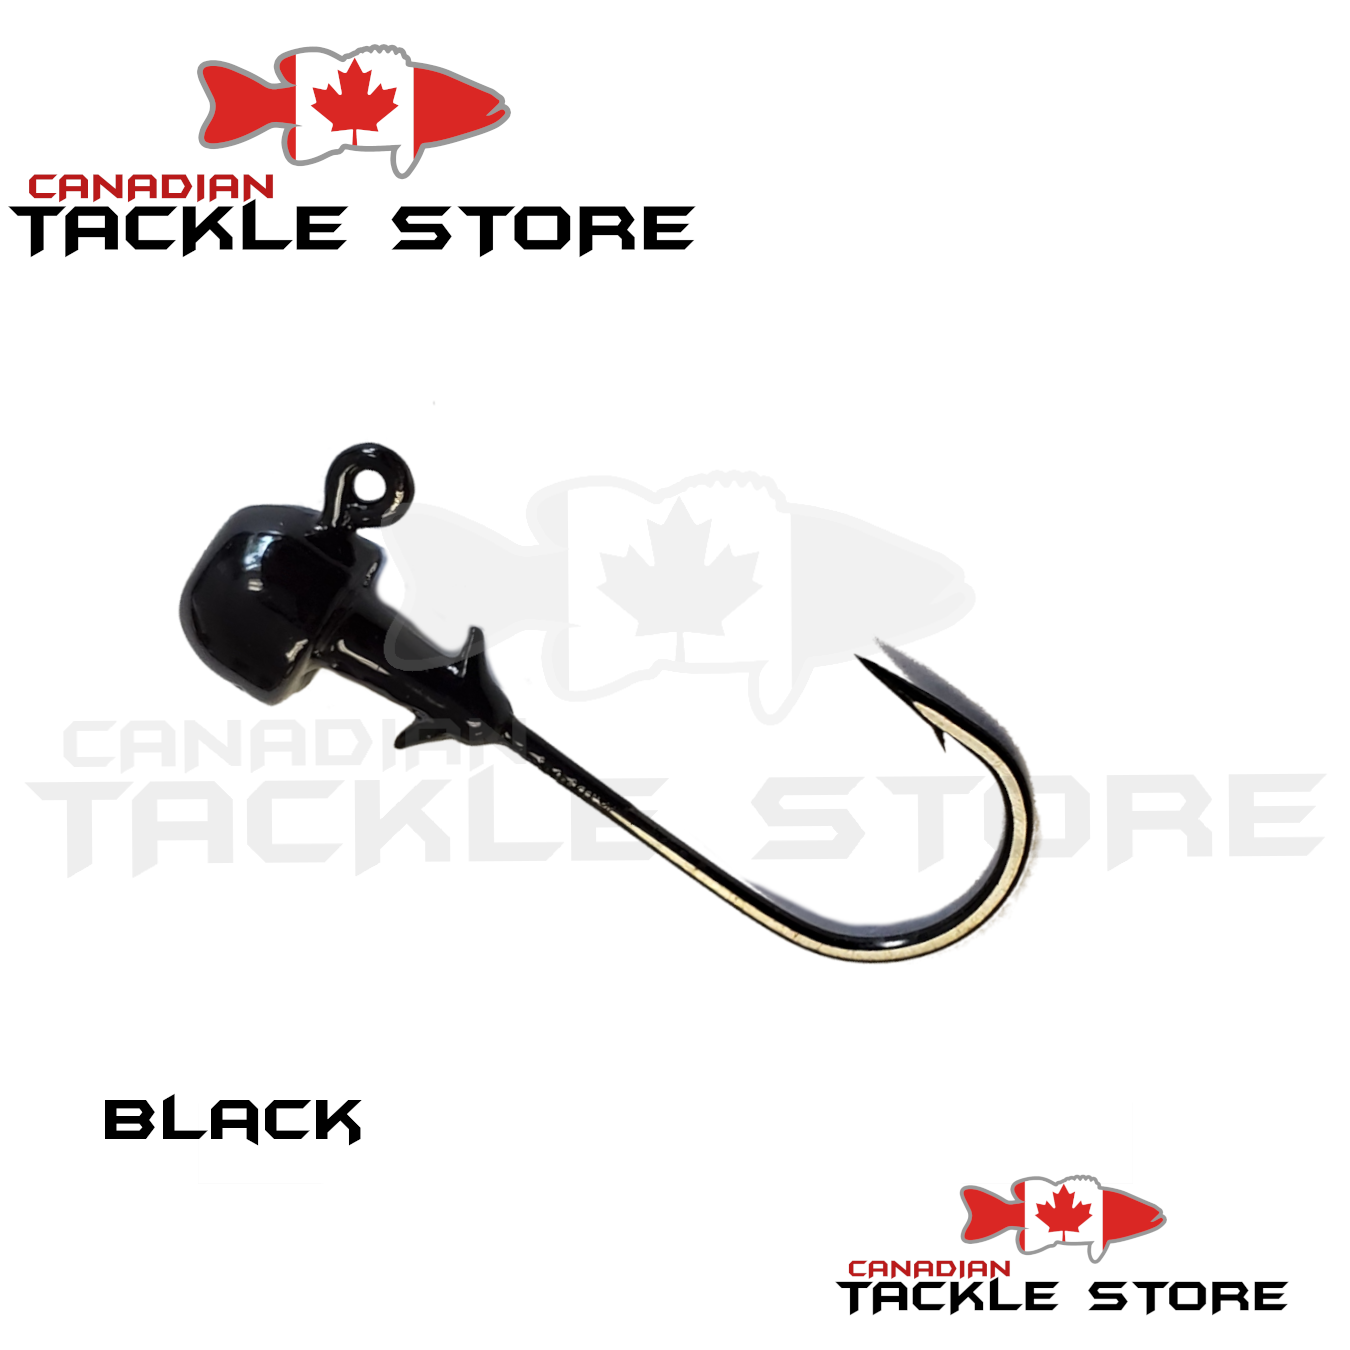 VMC Wacky Weedless Hook – Canadian Tackle Store